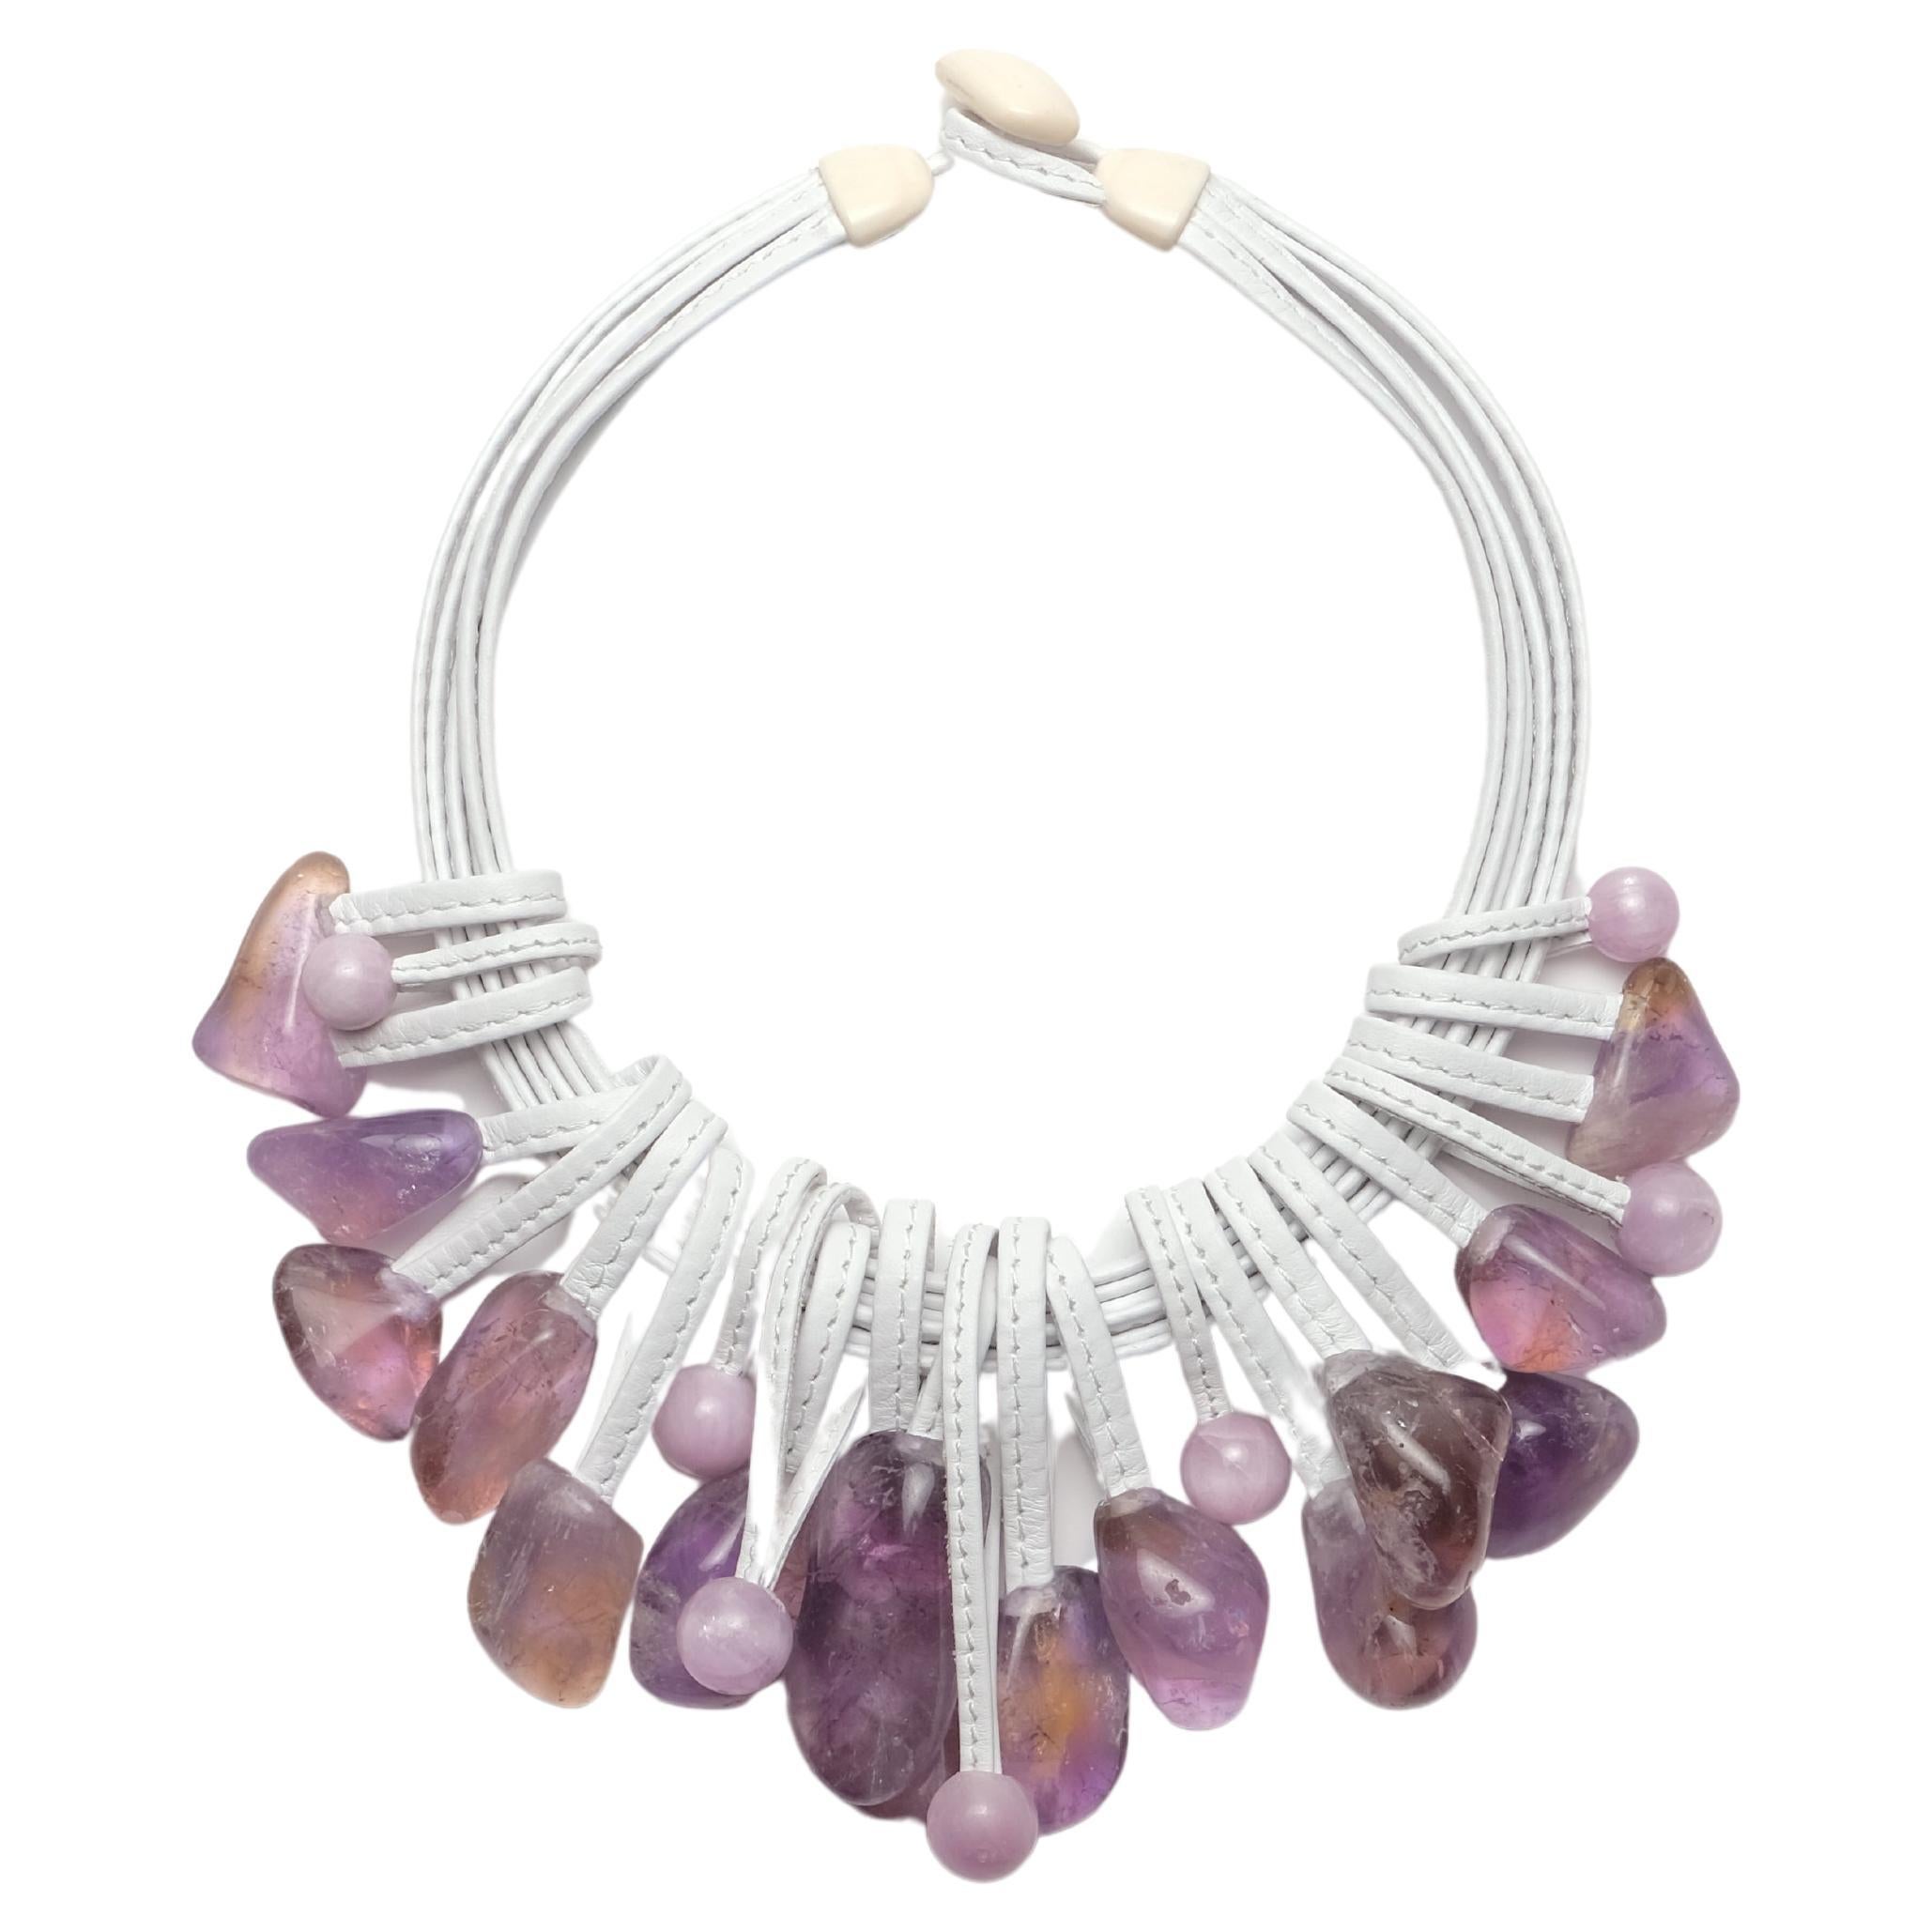 One-of-a-kind Necklace in Amethyst and Leather from the Danish Brand Monies